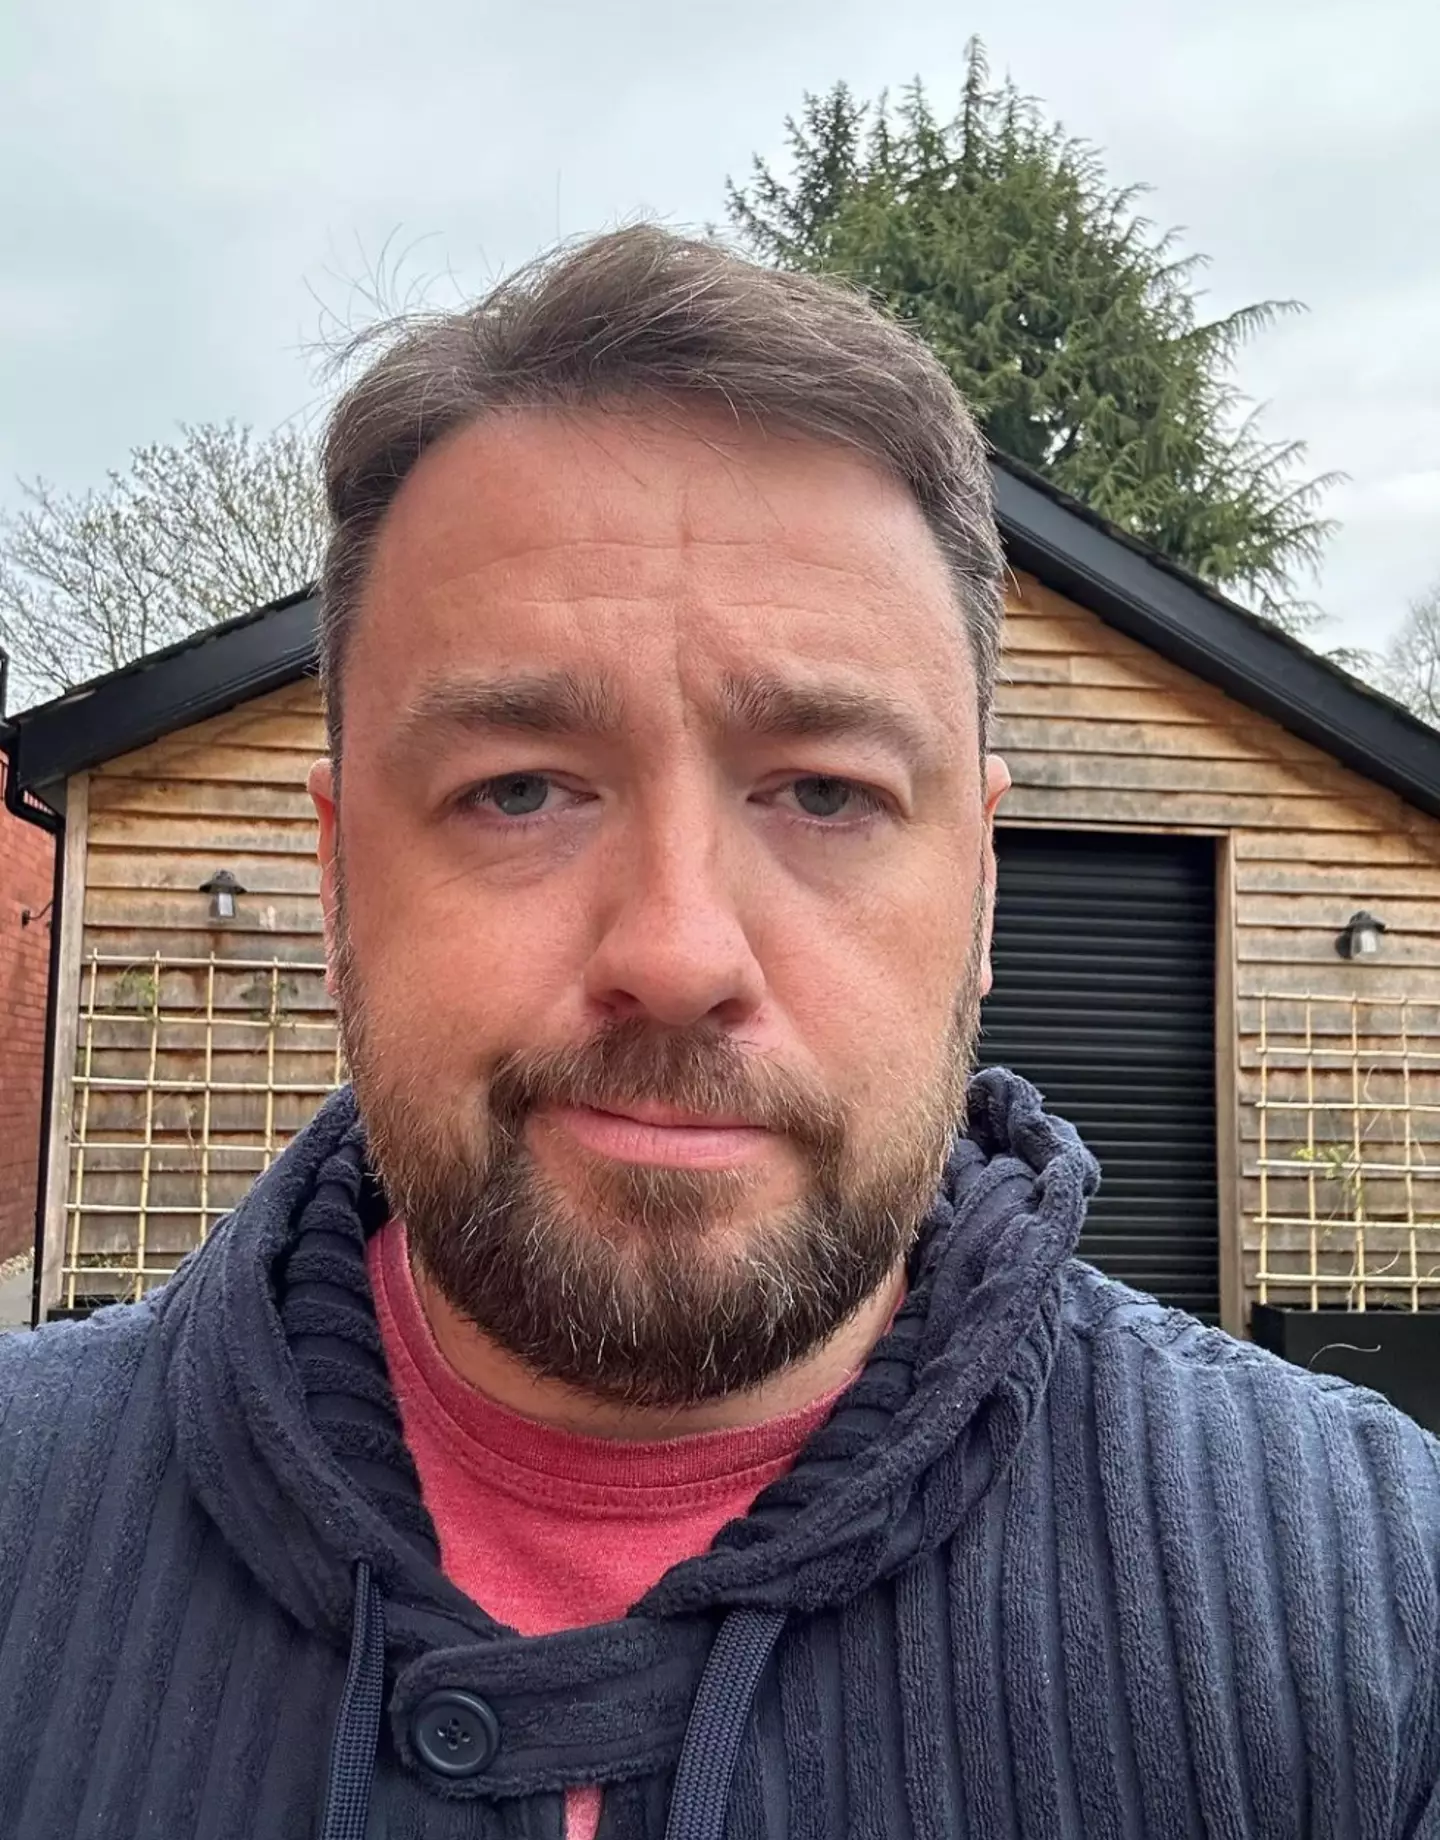 Jason Manford was absolutely terrified after his daughter’s phone was taken over by hackers.